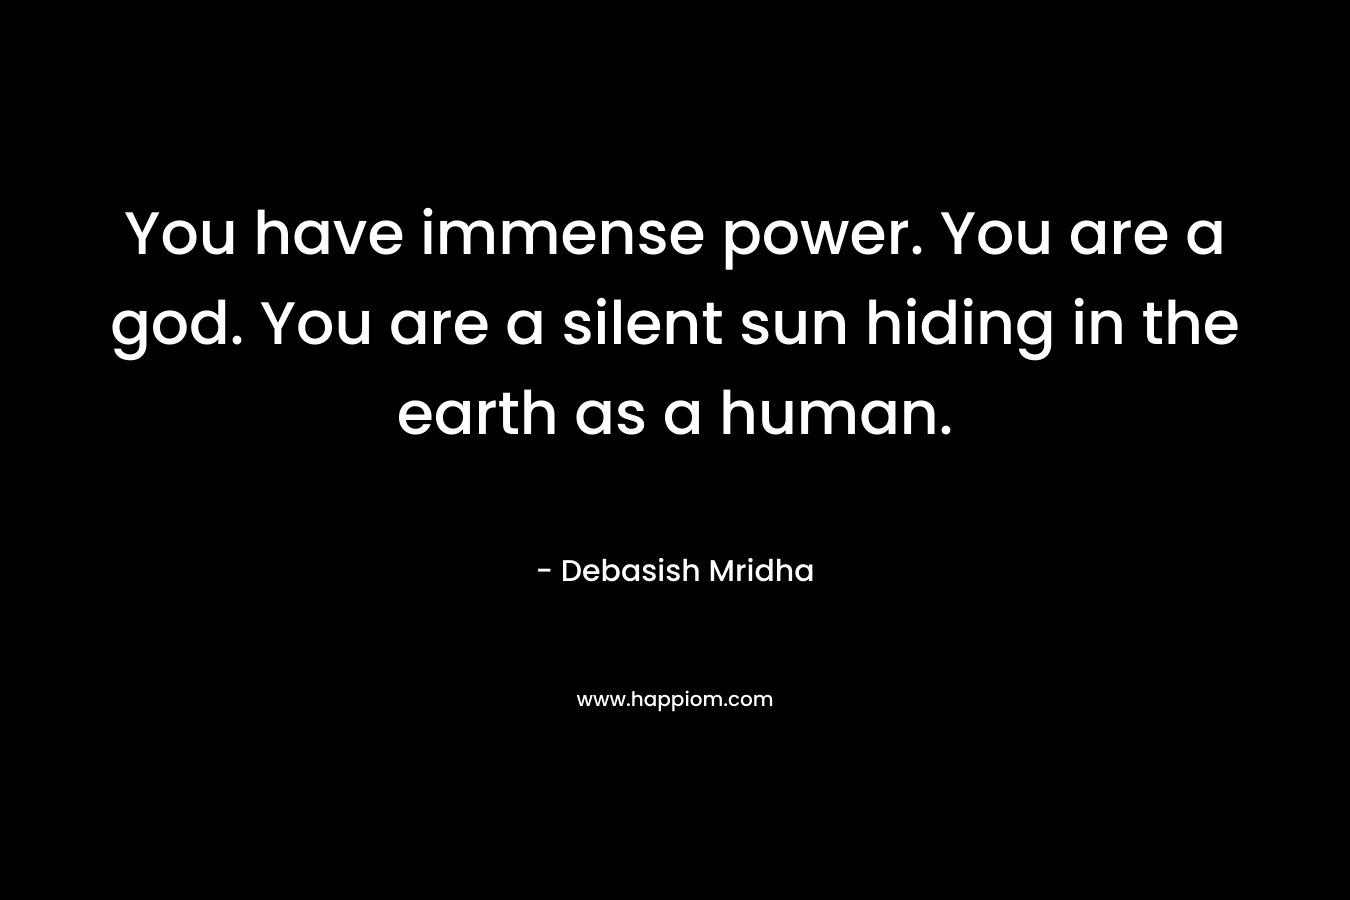 You have immense power. You are a god. You are a silent sun hiding in the earth as a human.